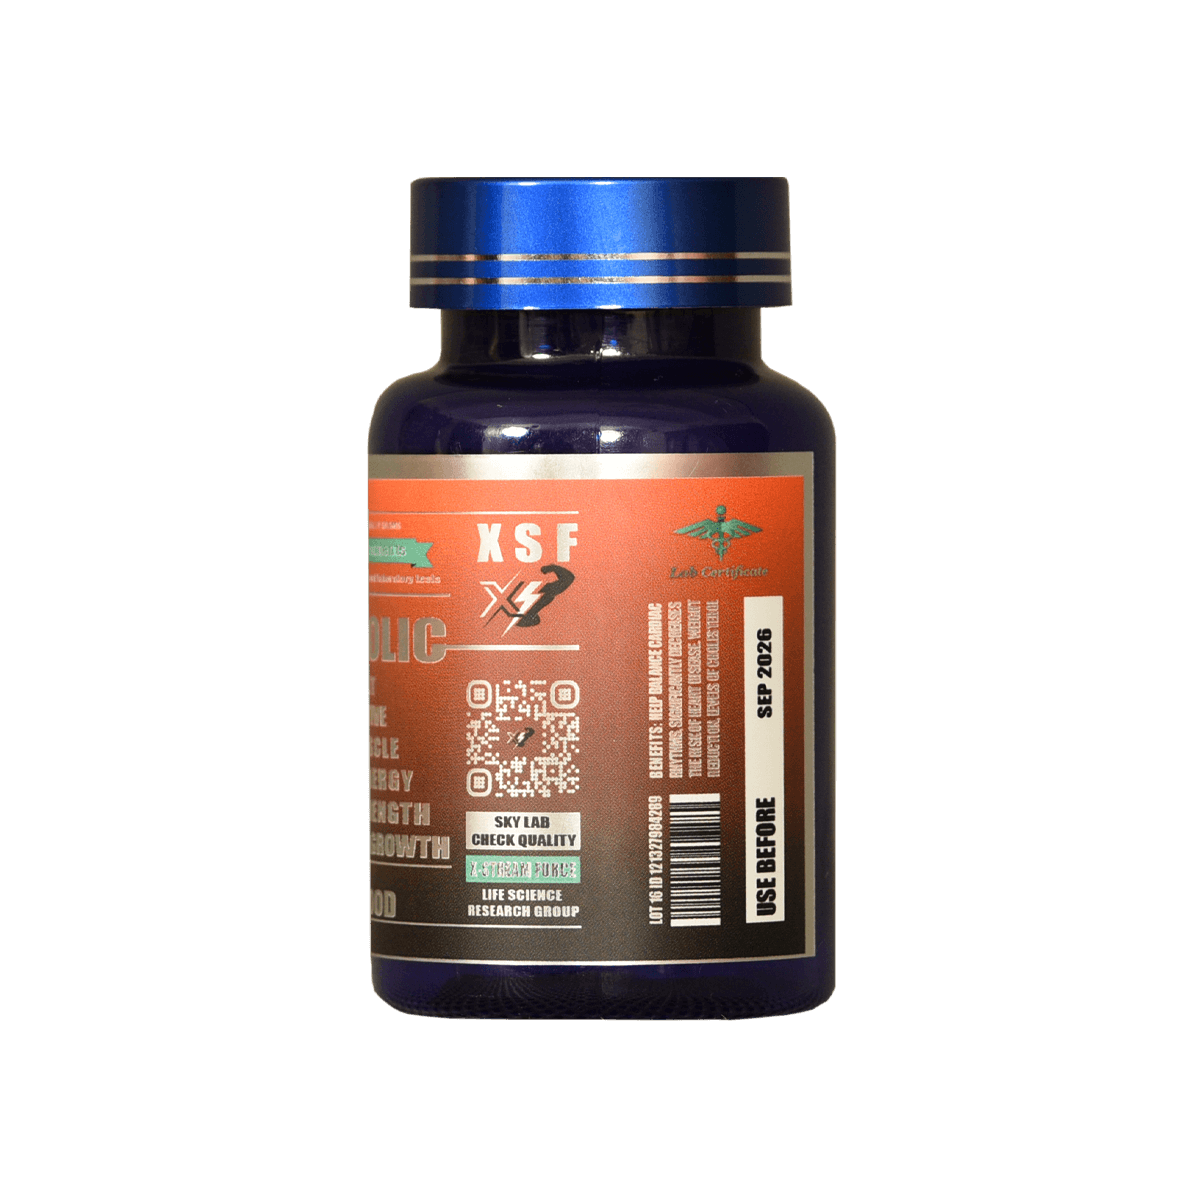 stenabolic-sr9009-capsules-60-10mg-muscle shop-xstreamforce-for recomp-fat cleaner✦sr9009 sarms✦ fitness supplements | XSF Store